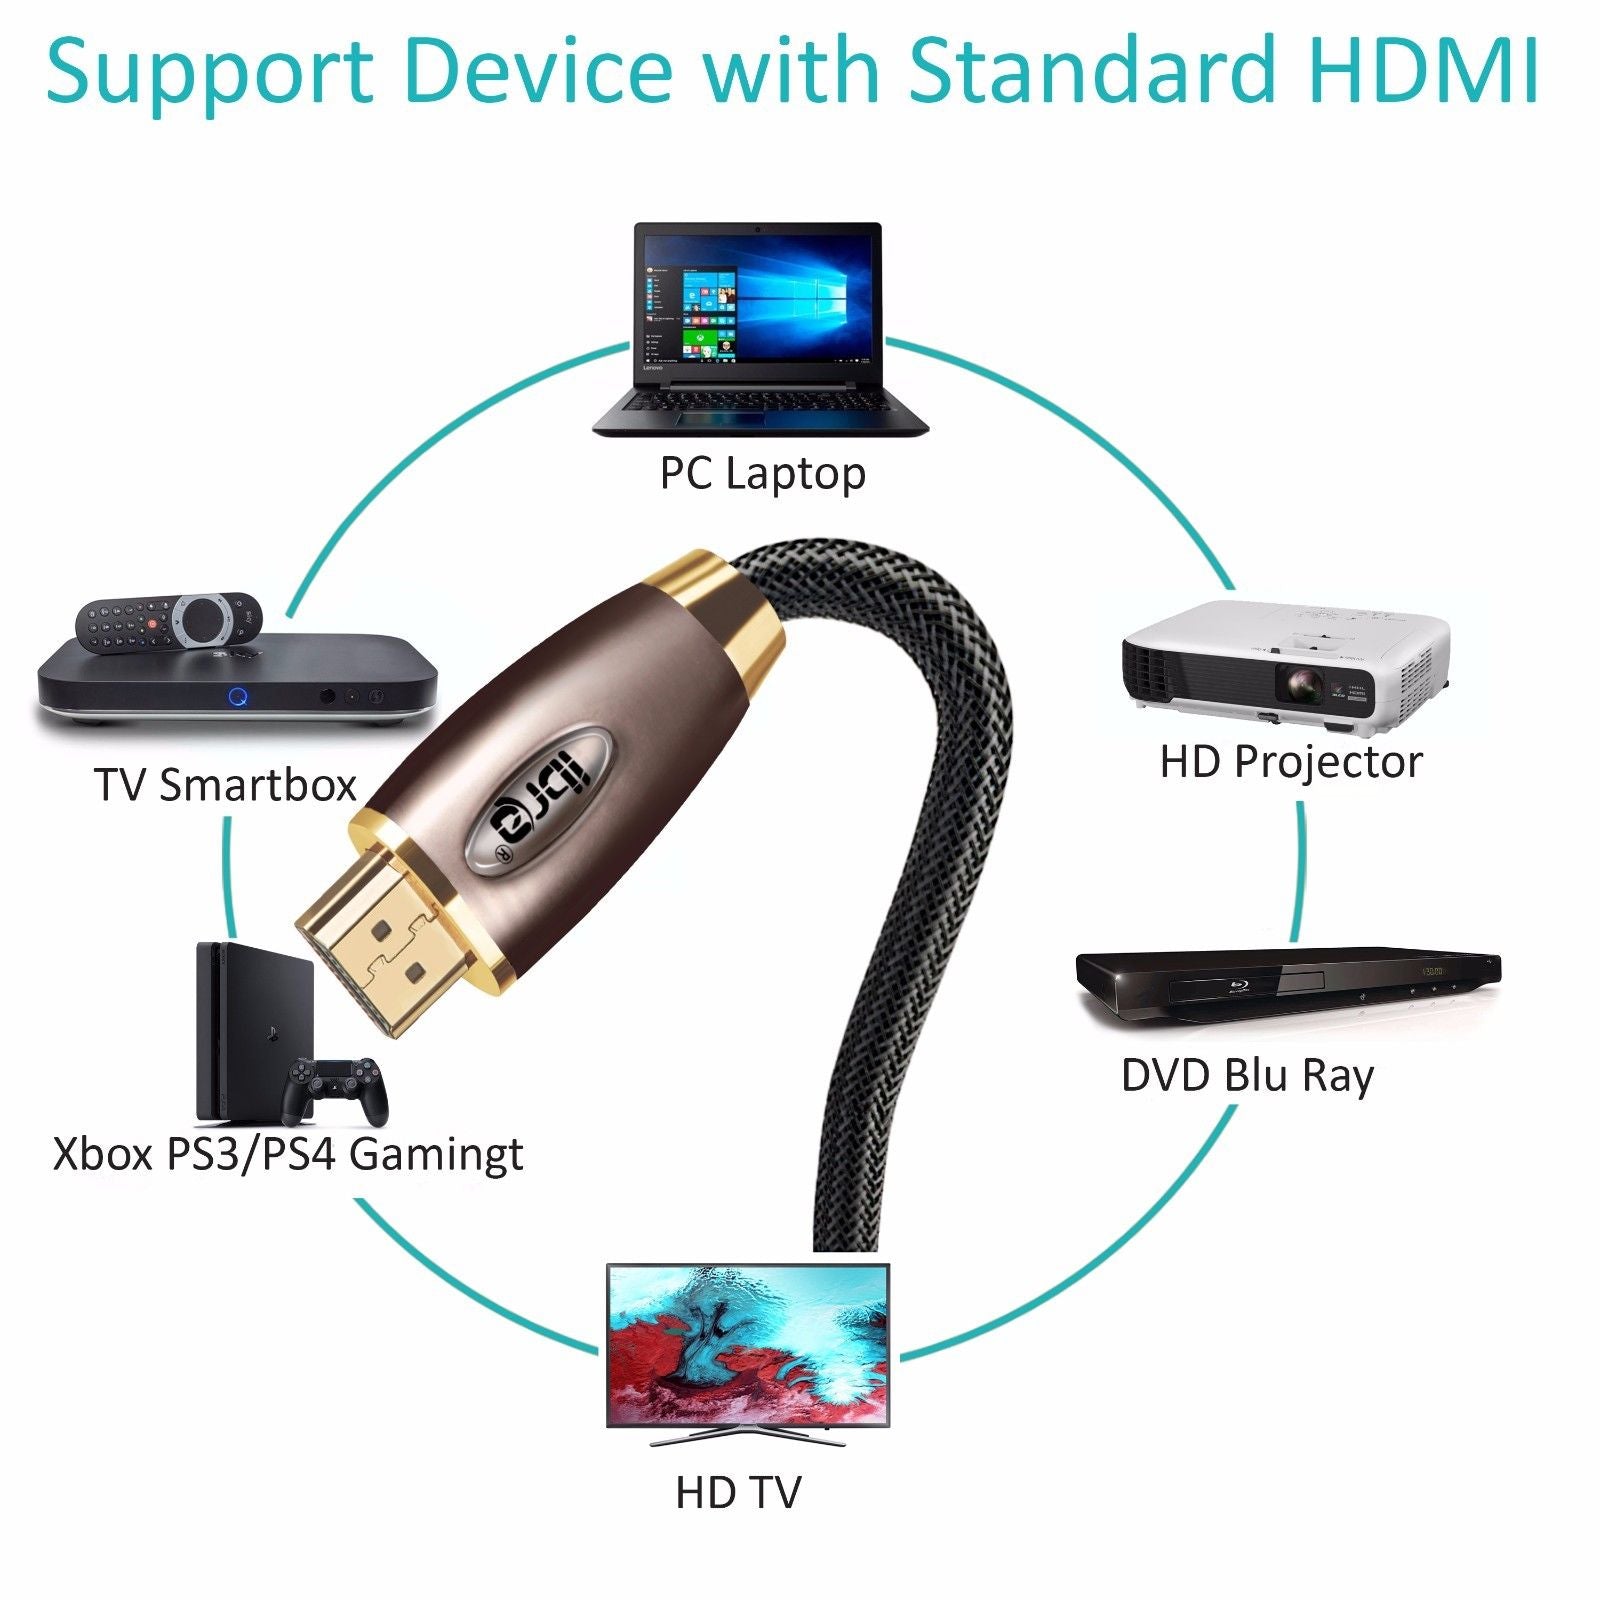 HDMI Cable 2M - 4K UHD HDMI 2.0(4K@60Hz) Ready -18Gbps-28AWG Braided Cord -Gold Plated Connectors -Ethernet,Audio Return -Video 4K 2160p,HD 1080p,3D -Xbox PlayStation PS3 PS4 PC Apple TV - IBRA RED